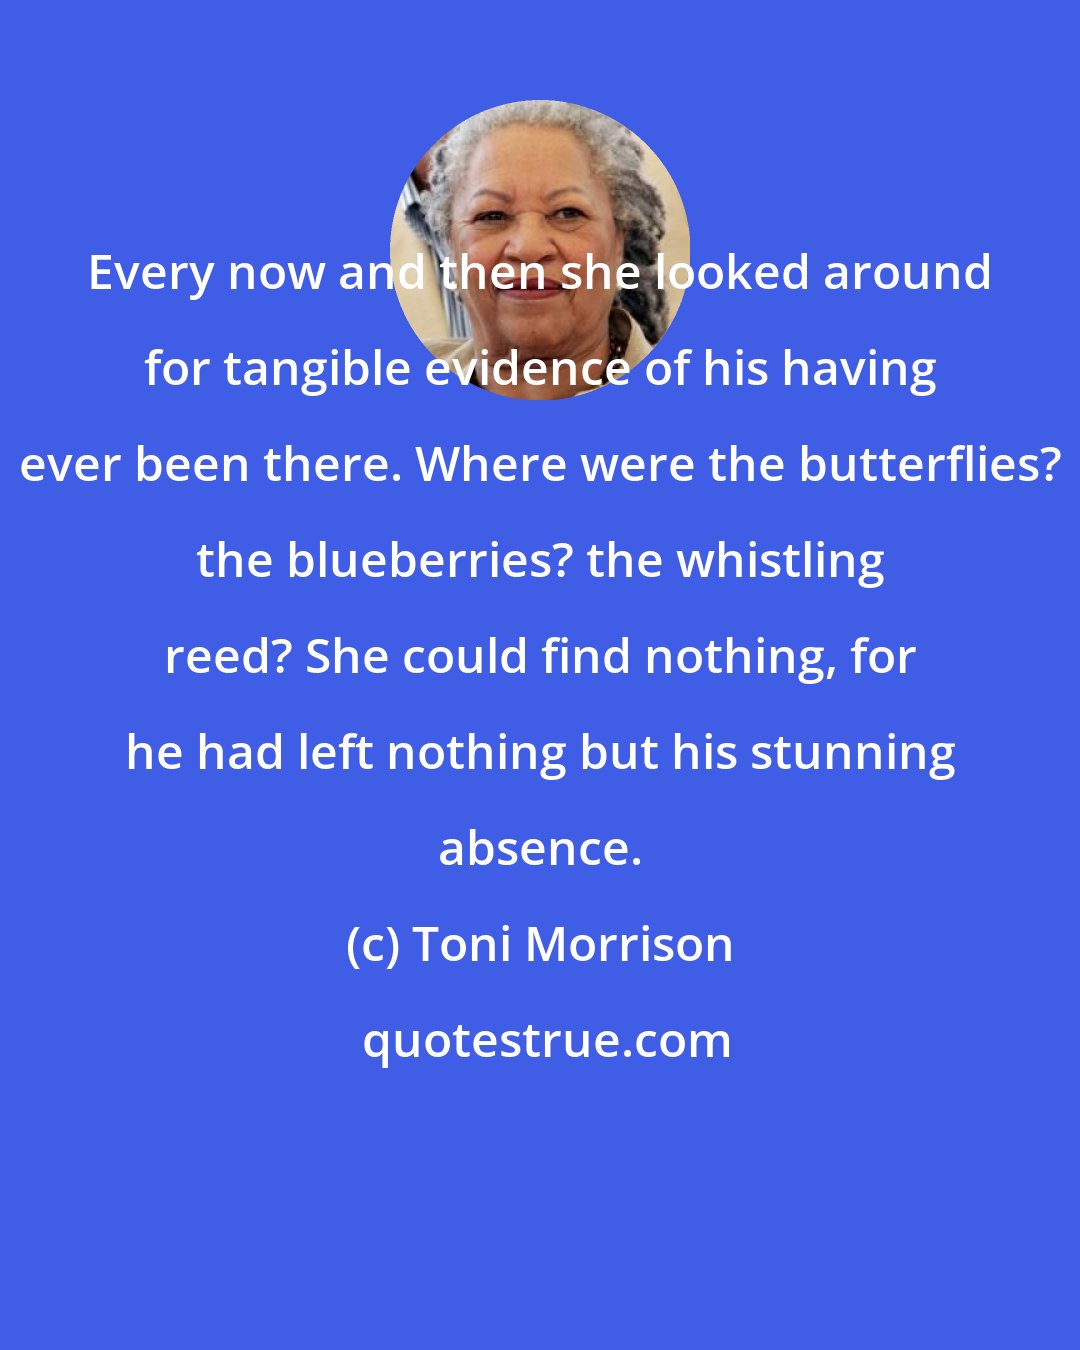 Toni Morrison: Every now and then she looked around for tangible evidence of his having ever been there. Where were the butterflies? the blueberries? the whistling reed? She could find nothing, for he had left nothing but his stunning absence.